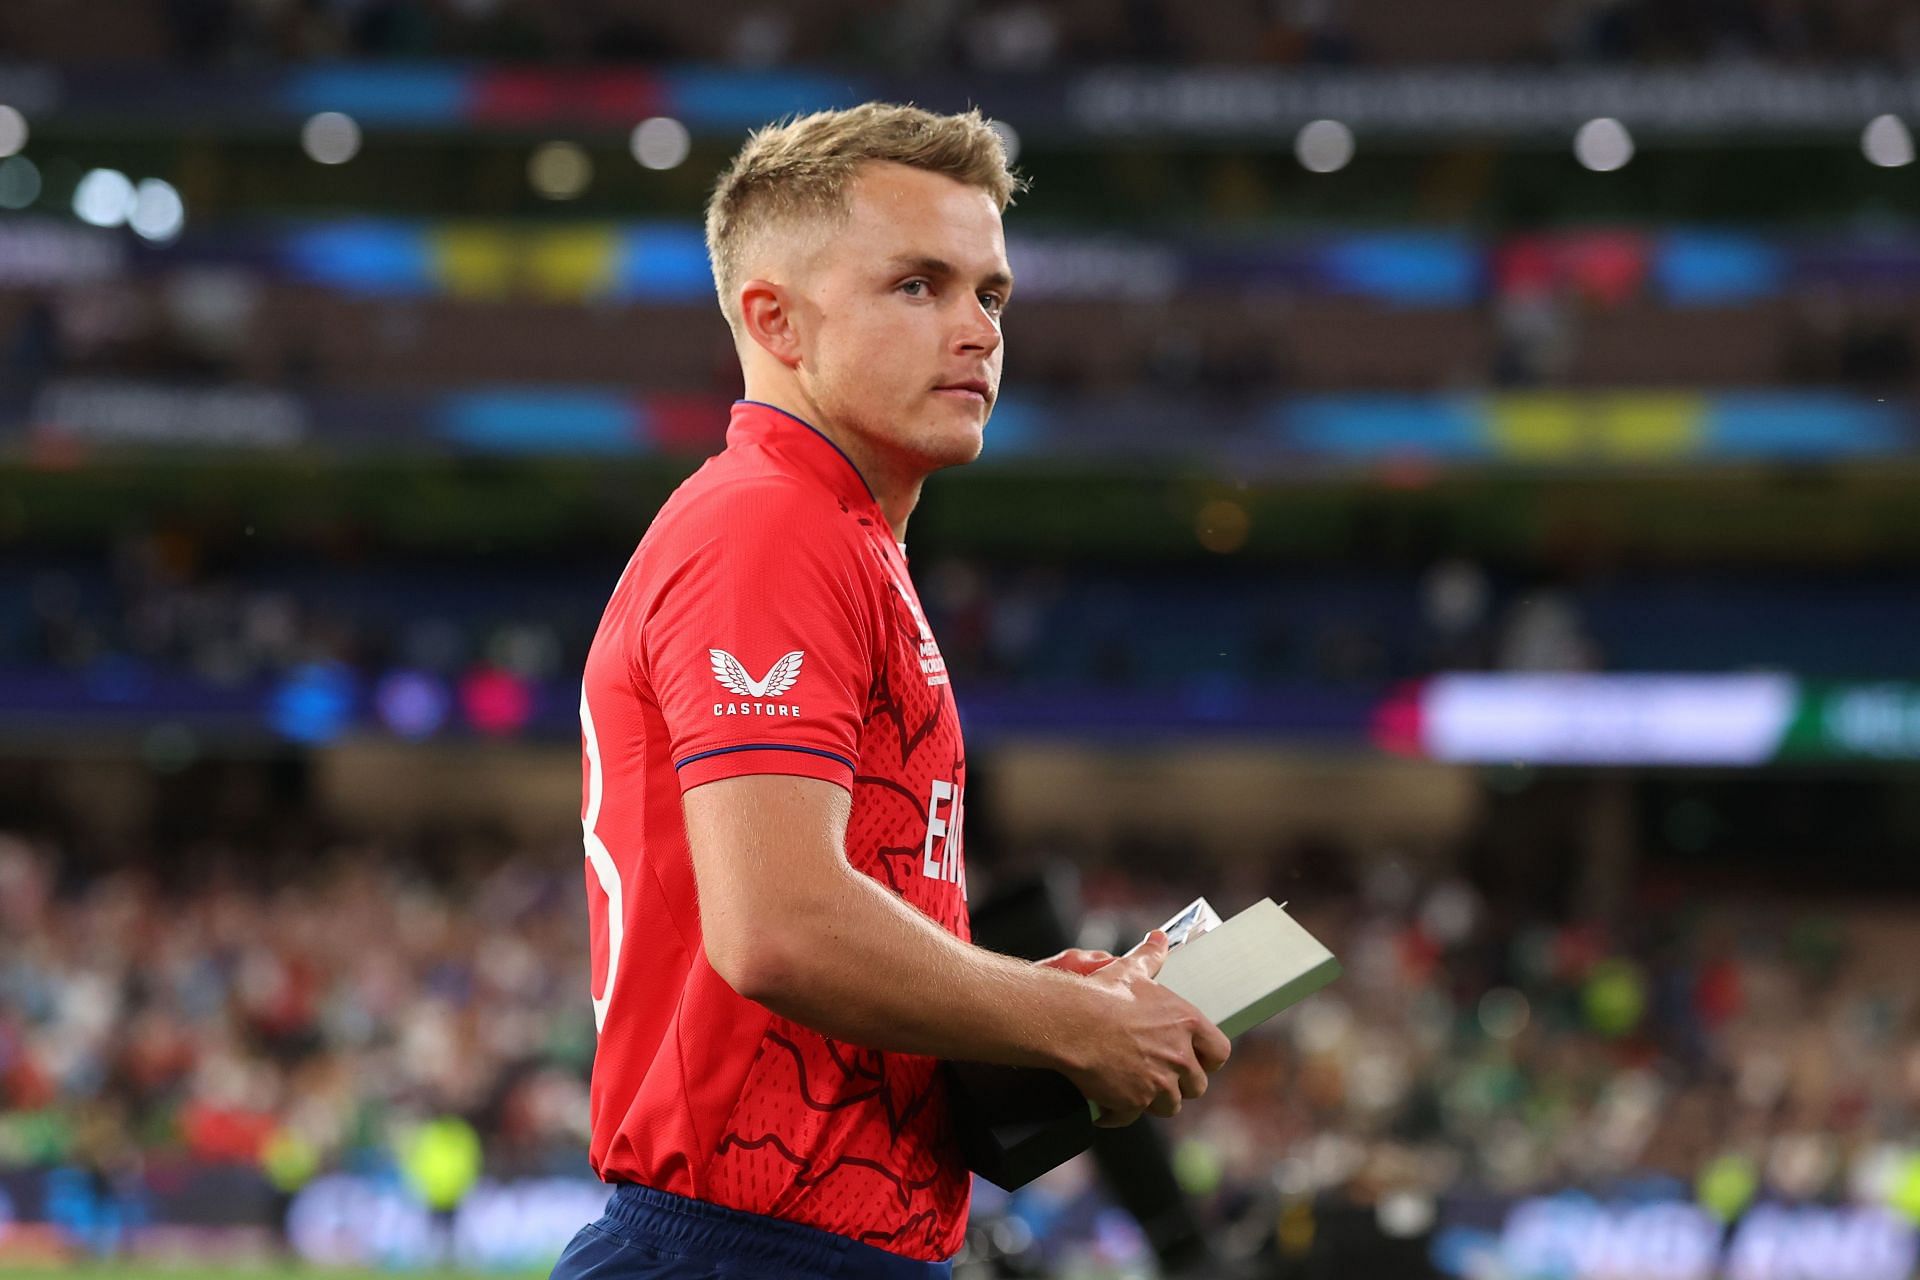 Sam Curran joined the Chennai Super Kings in 2020. (Credits: Getty)